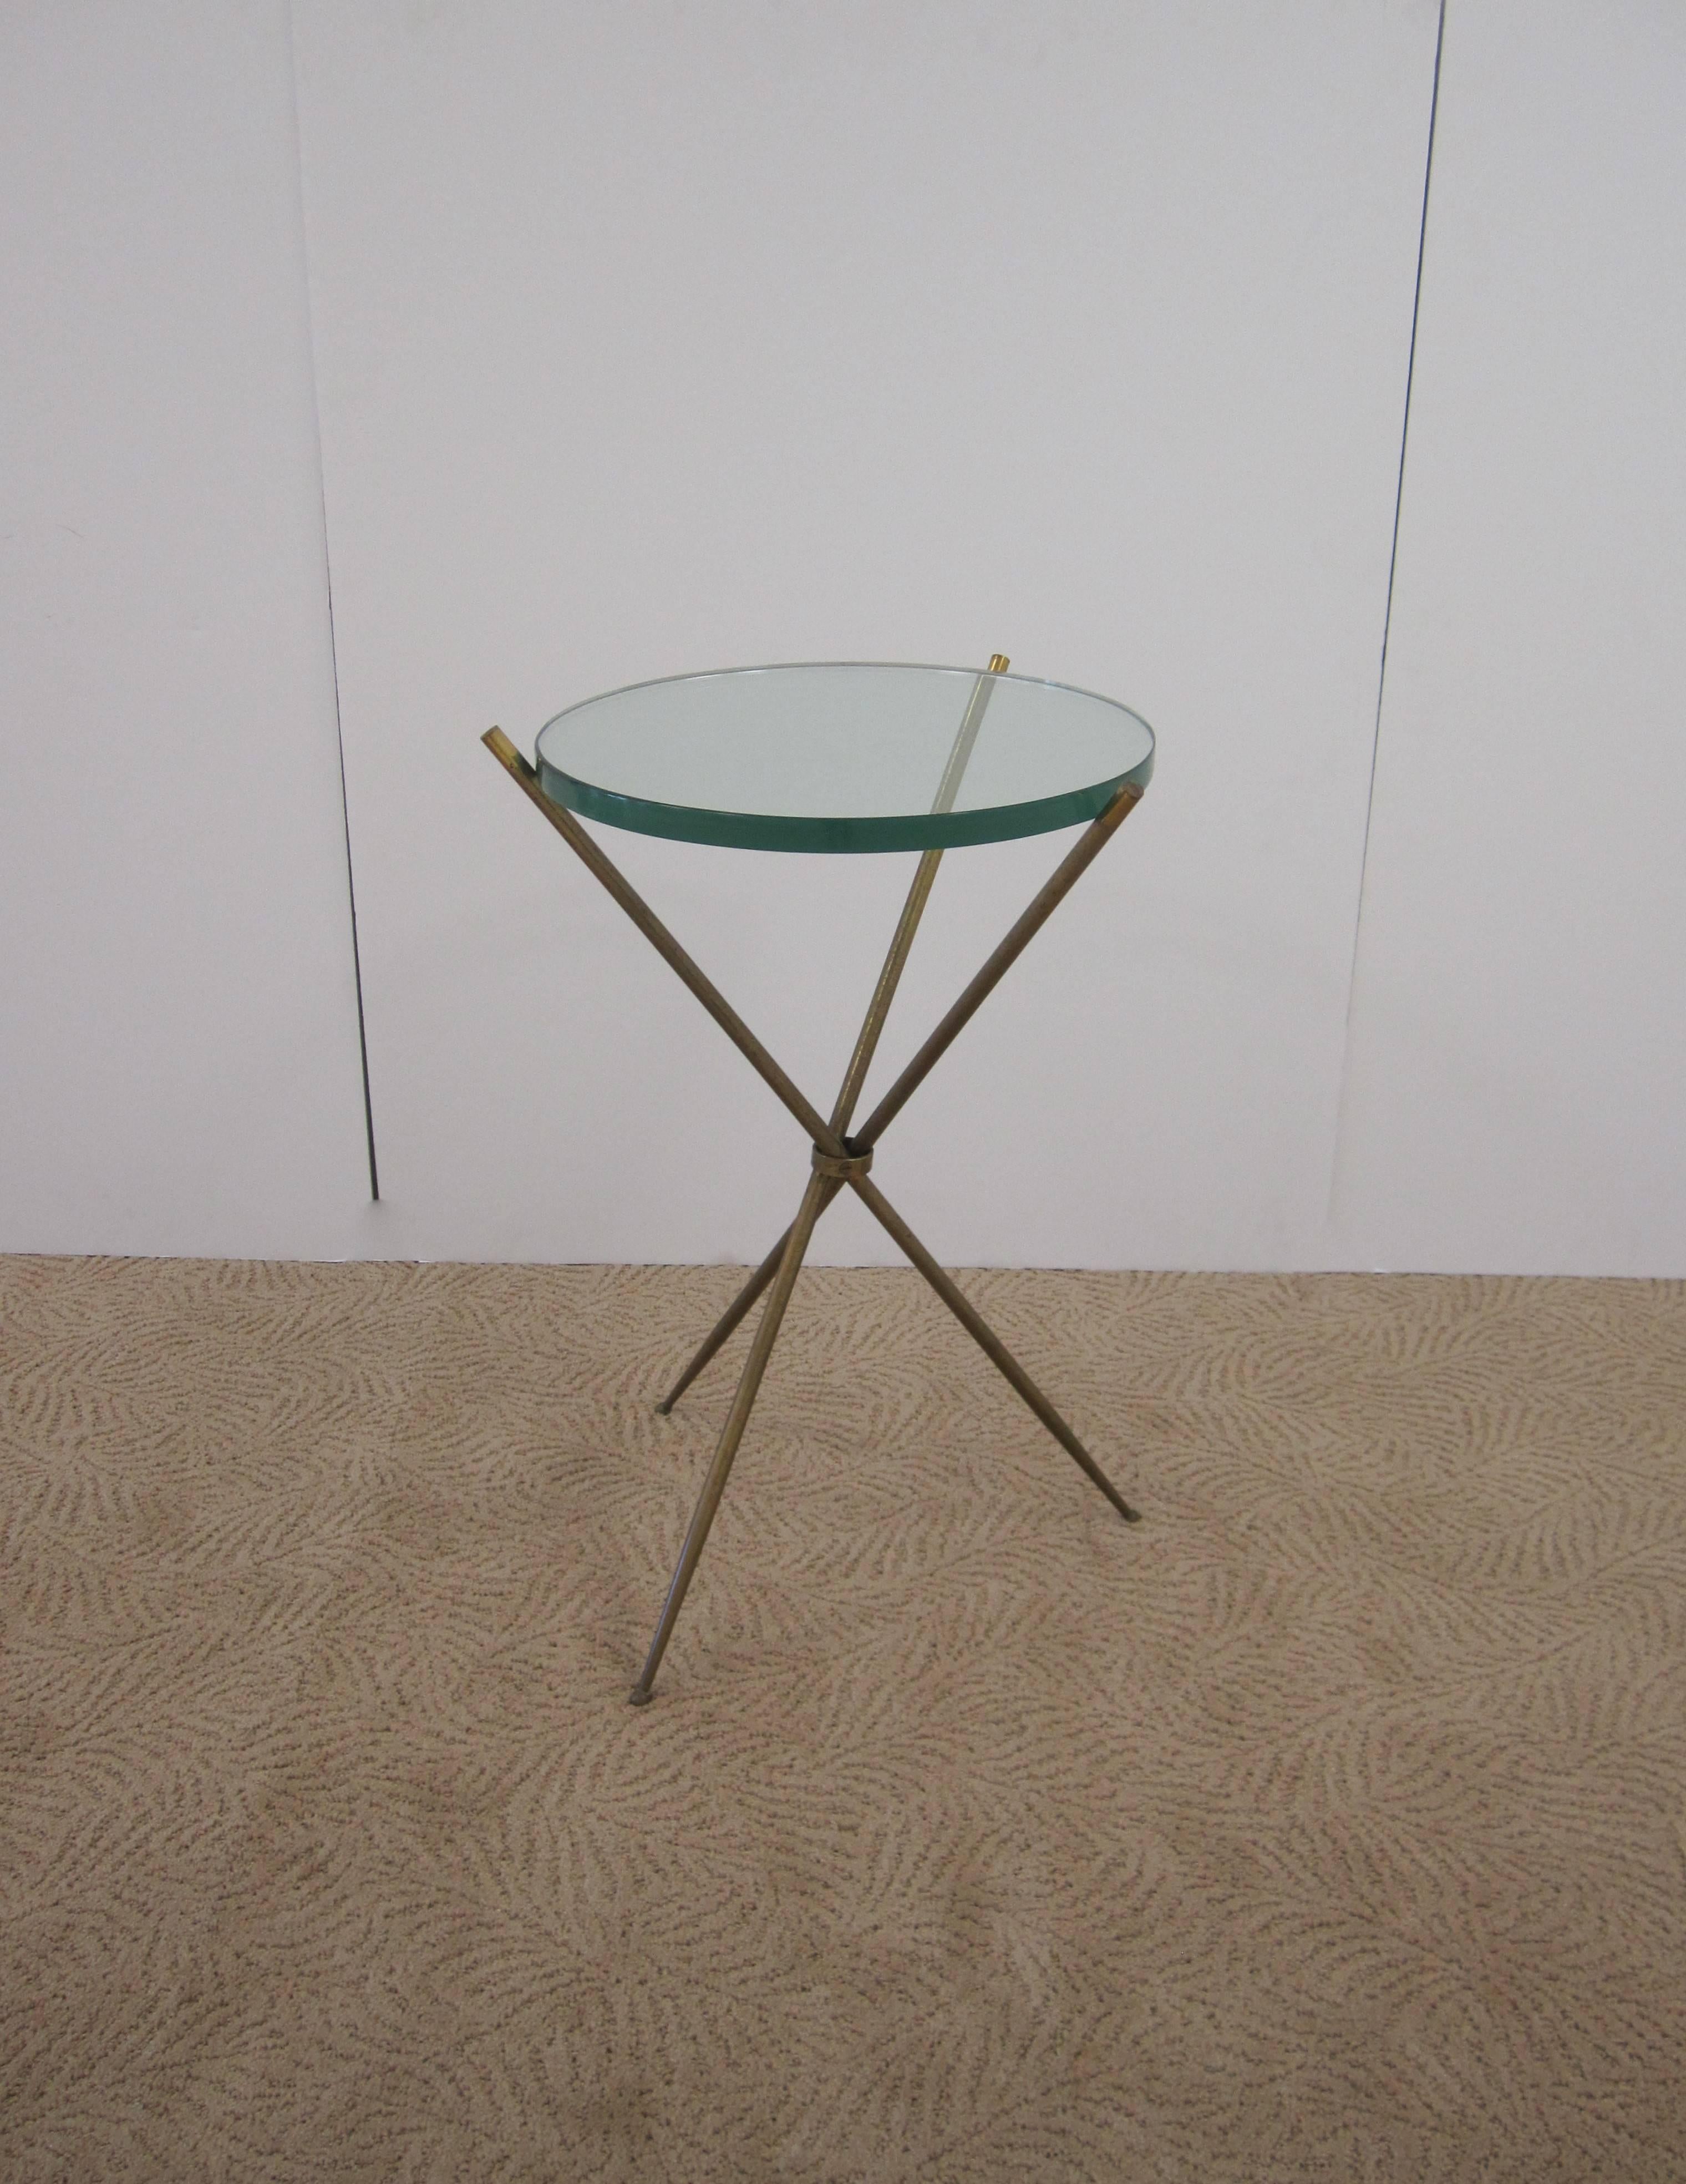 Vintage Modern Italian Brass and Glass Tripod Side Table after Gio Ponti, Italy 2